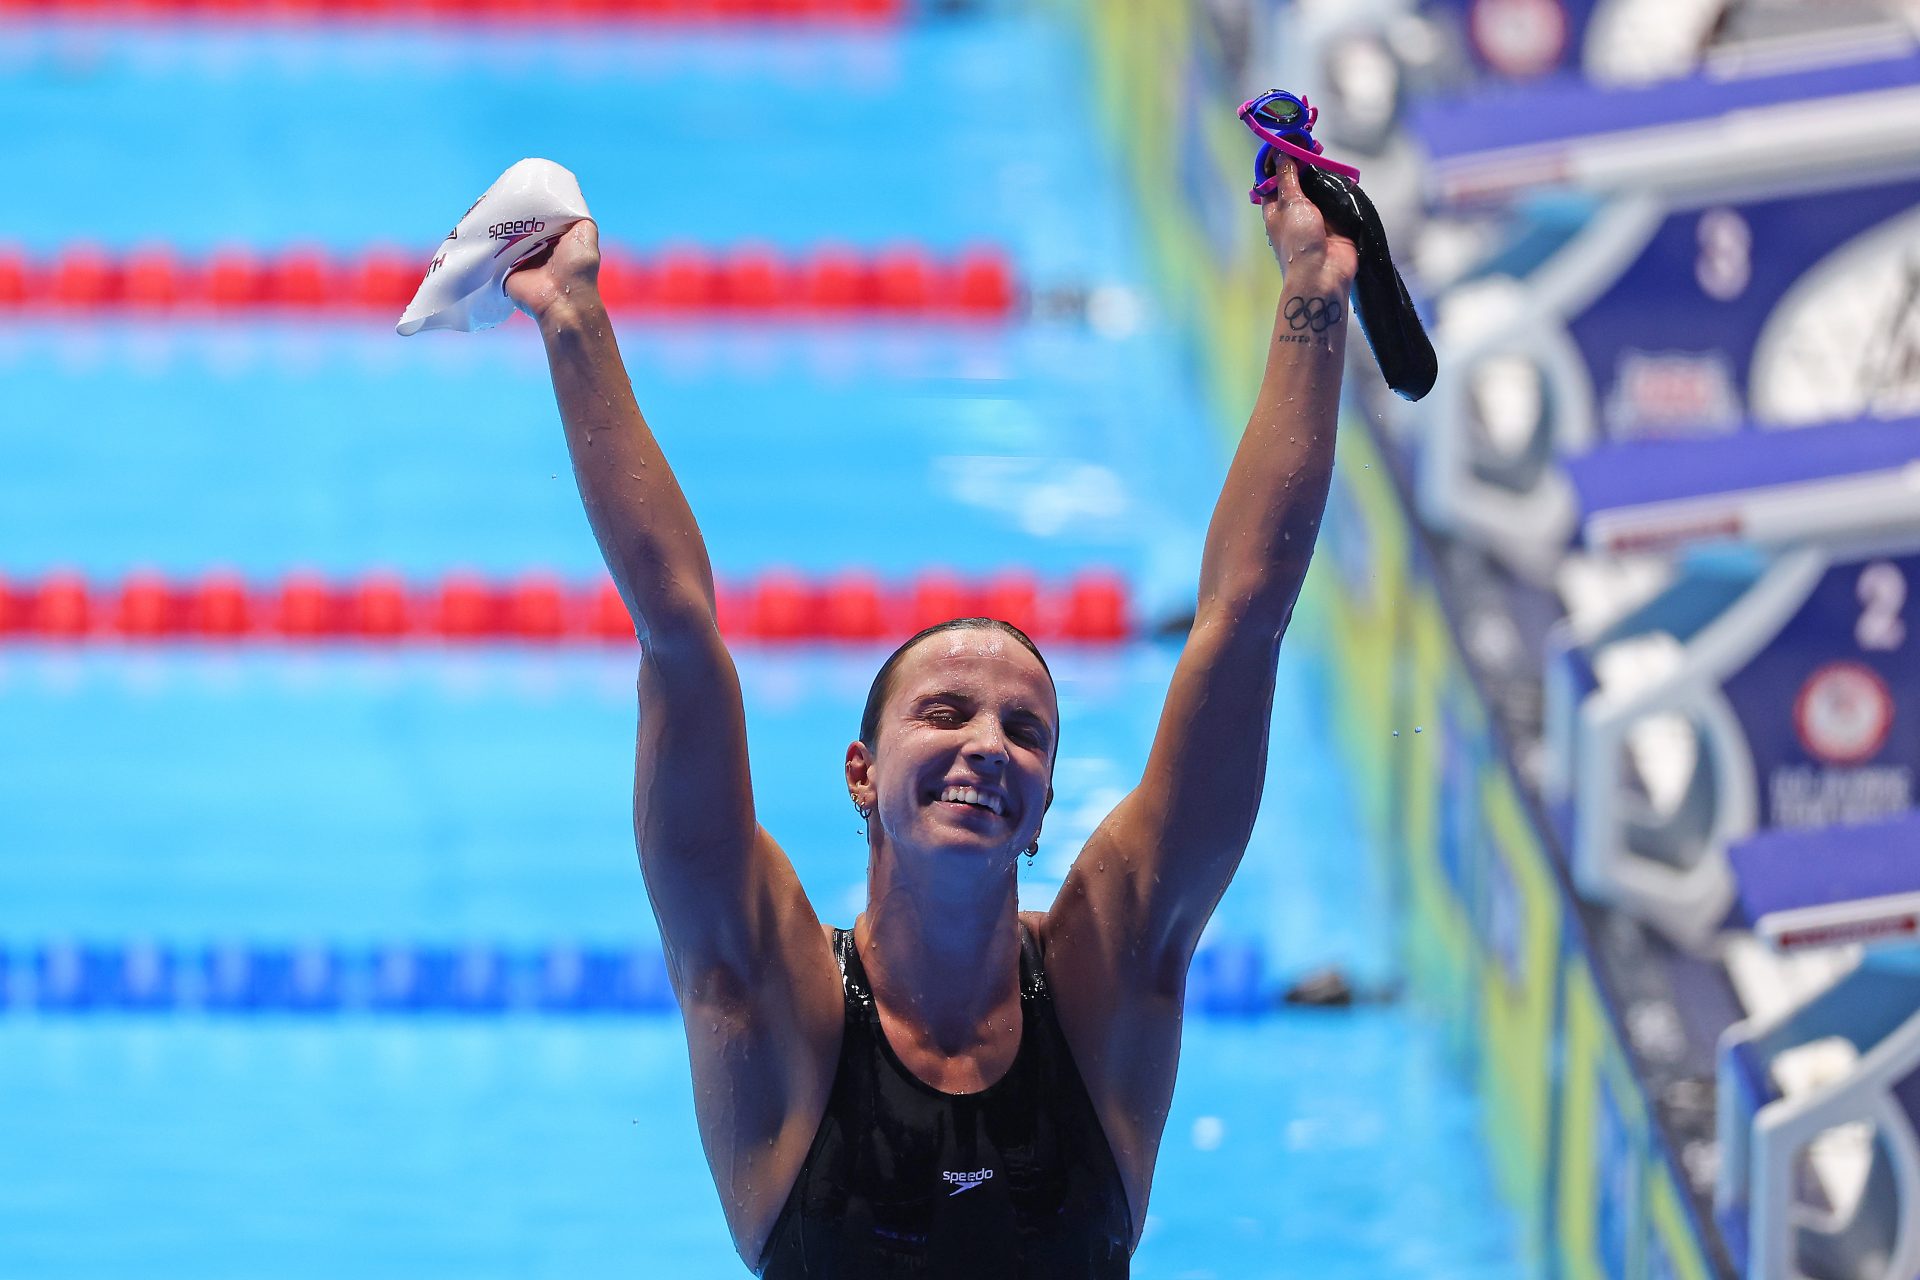 Bizarre: Regan Smith swims and swears her way into the record books!